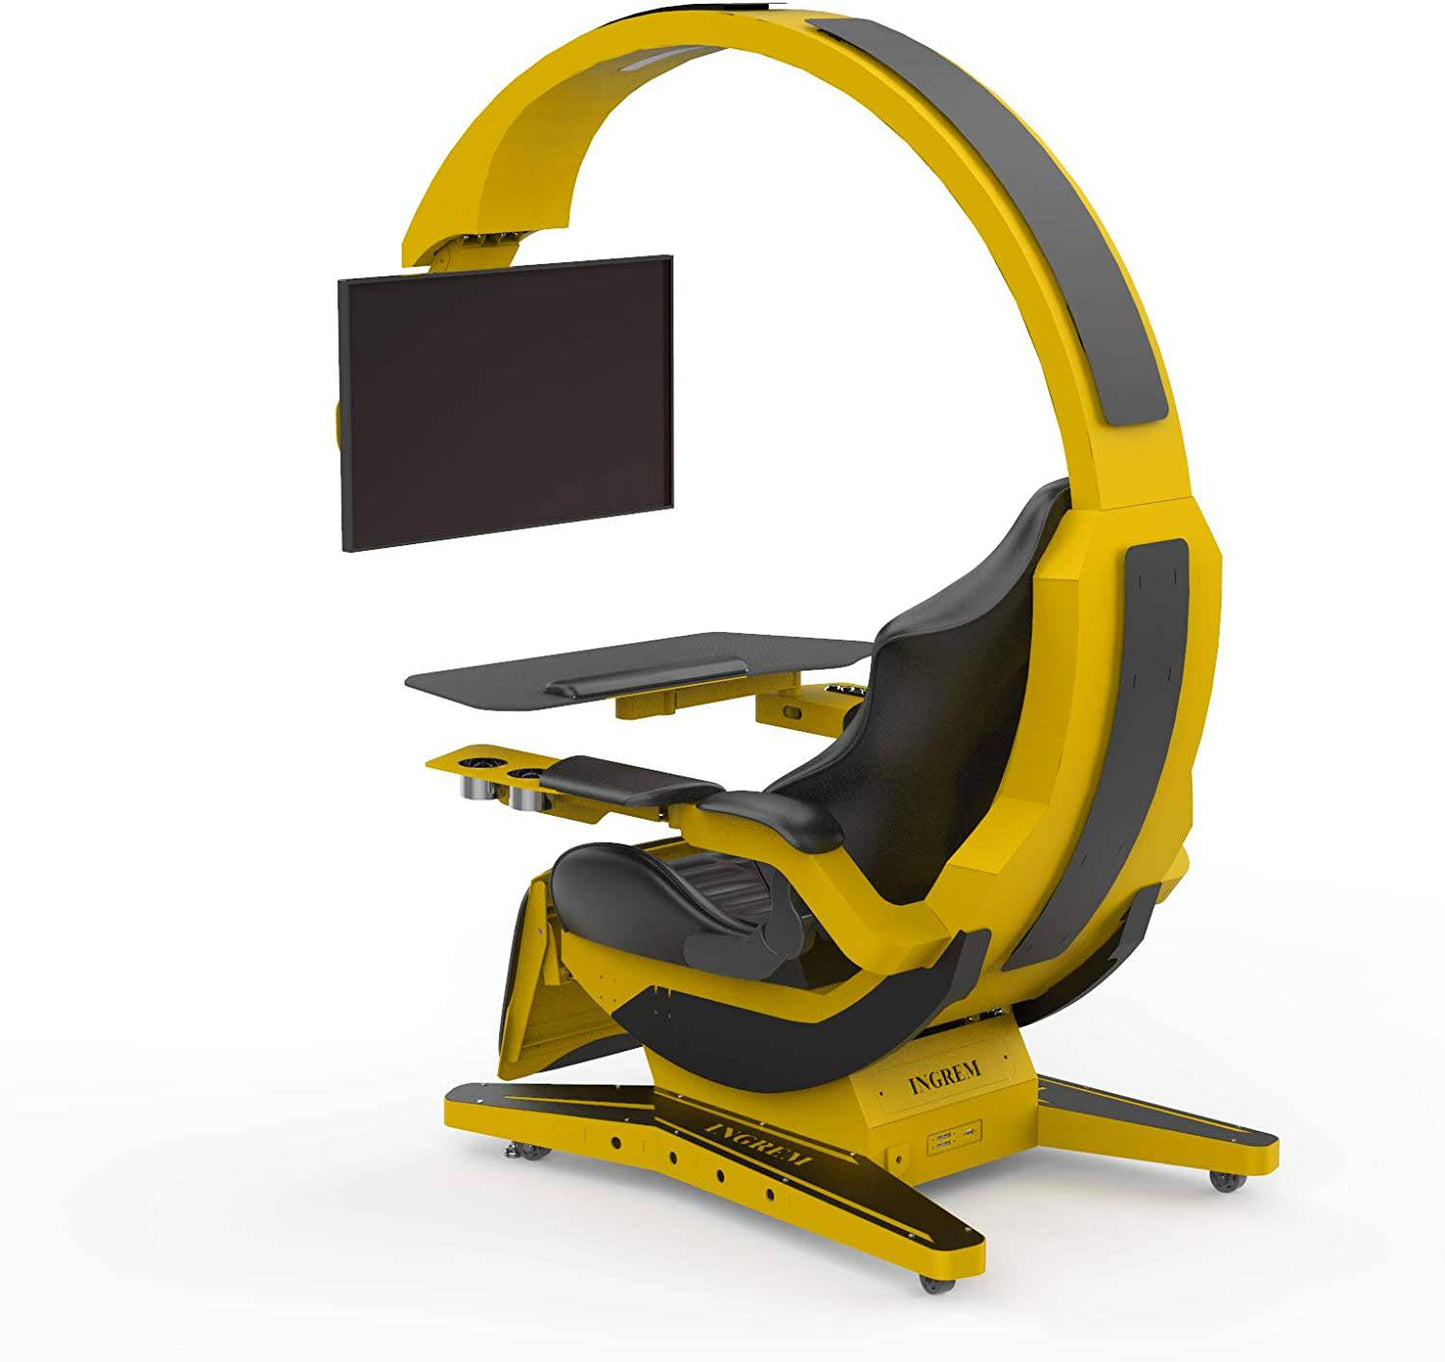 COOLBABY Gaming Station Cabin, Elevate Your Home Gaming Experience with the Ultimate Computer Cockpit and Happy Chair - COOLBABY